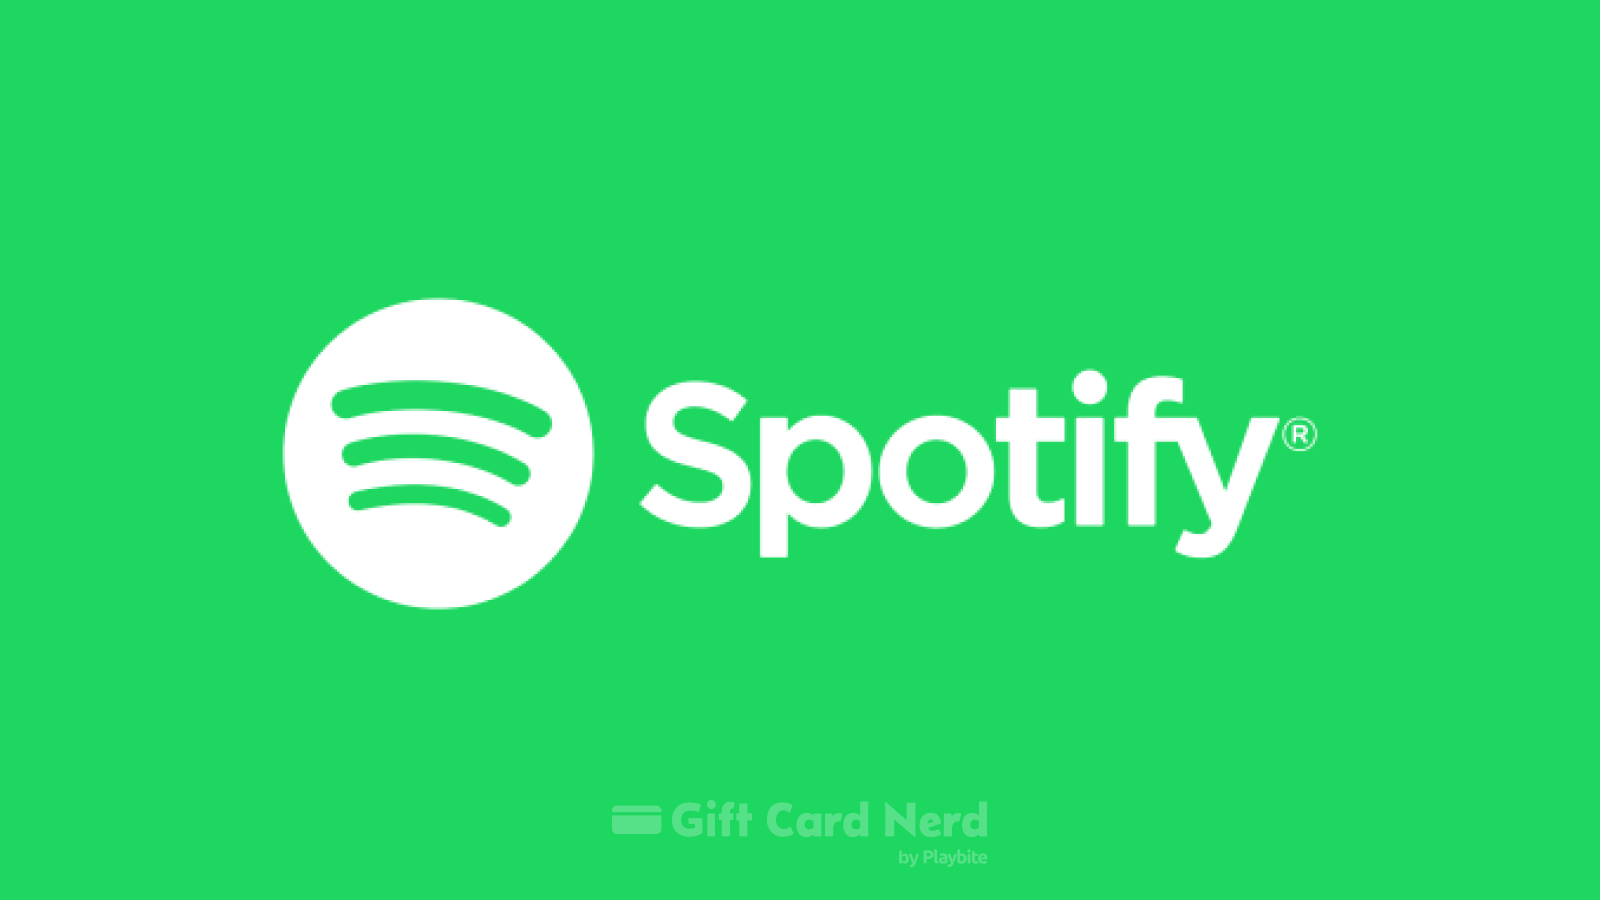 Can You Use a Spotify Gift Card on Steam?